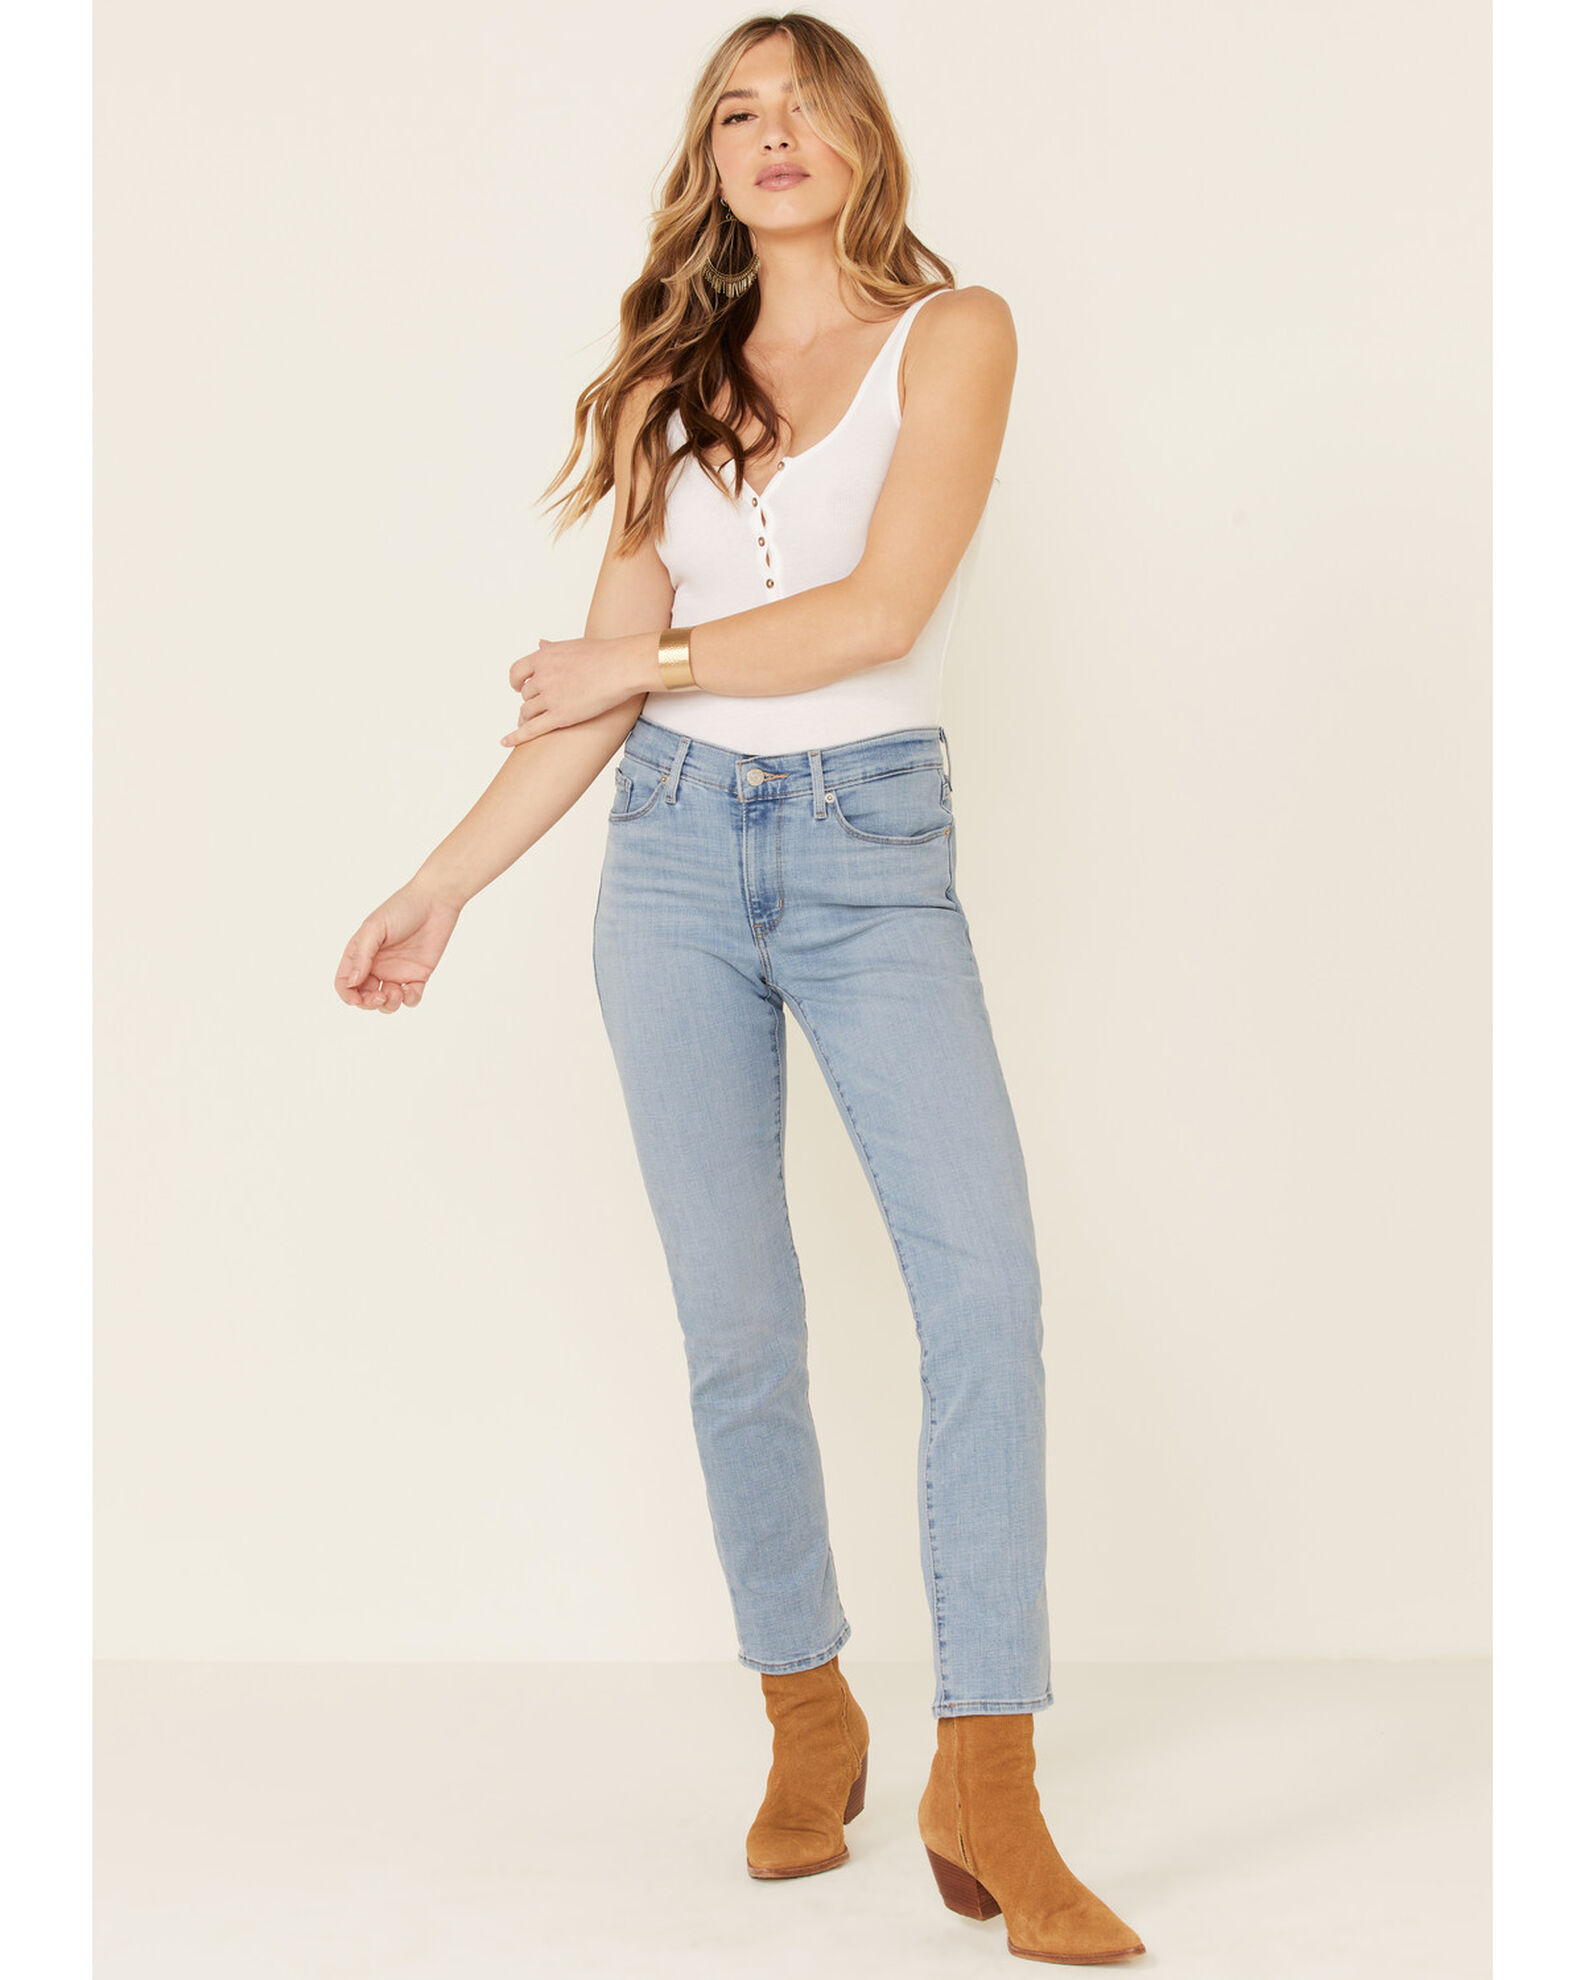 Levi's Women's Classic Straight Fit Jeans - Country Outfitter